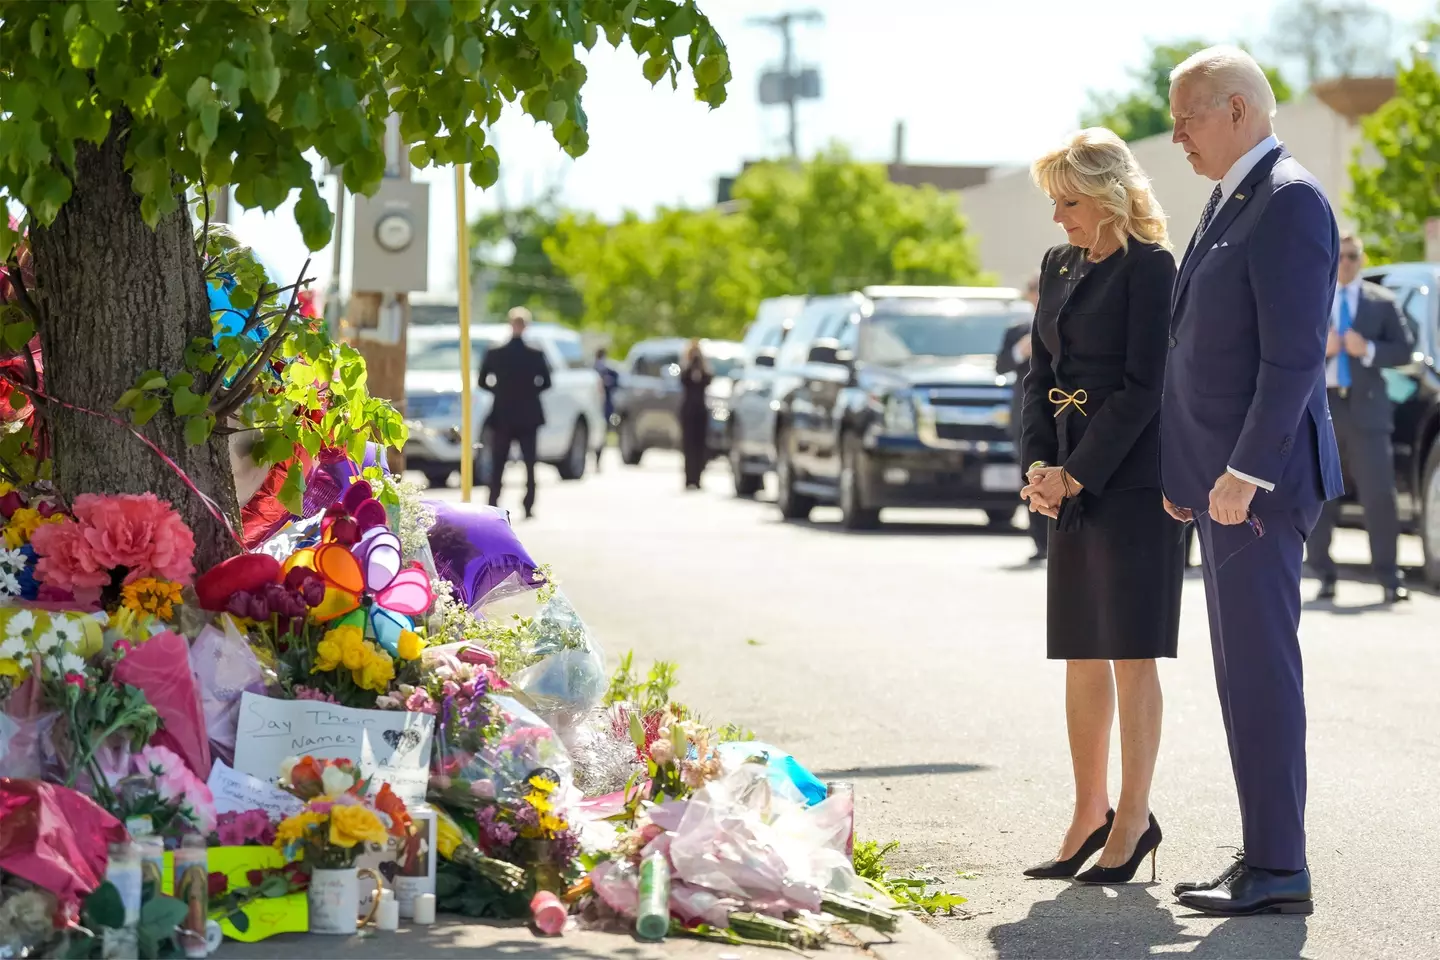 US President Joe Biden and First Lady Jill Biden pay tribute to the victims of a mass shooting in Buffalo, New York, earlier this year.